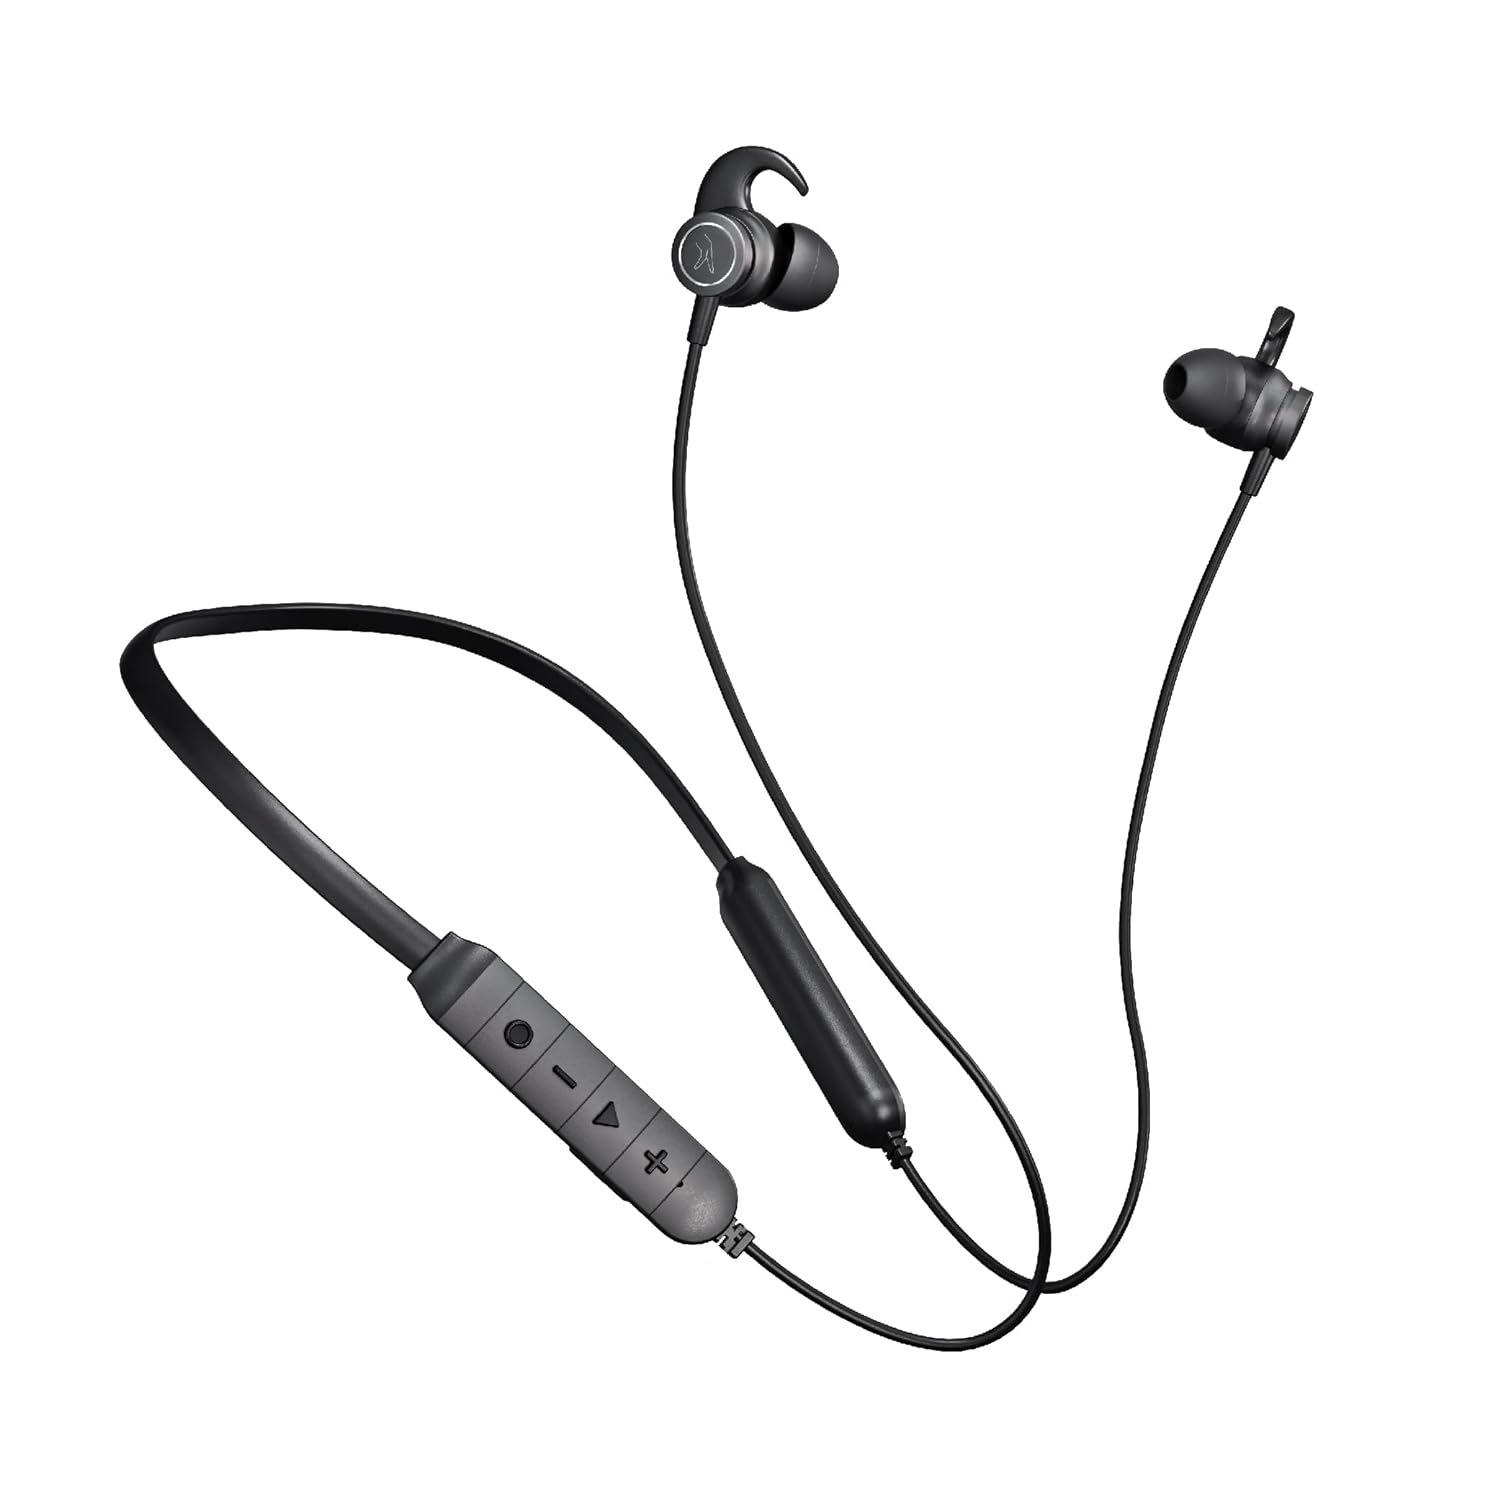 FINGERS FC-Bassitica Wireless in-Ear Bluetooth Neckband Earphones with 50-Hour Playtime, 6 Unique Music Modes, Mic with Surround Noise Cancellation SNC™ Technology, (Rich Grey)